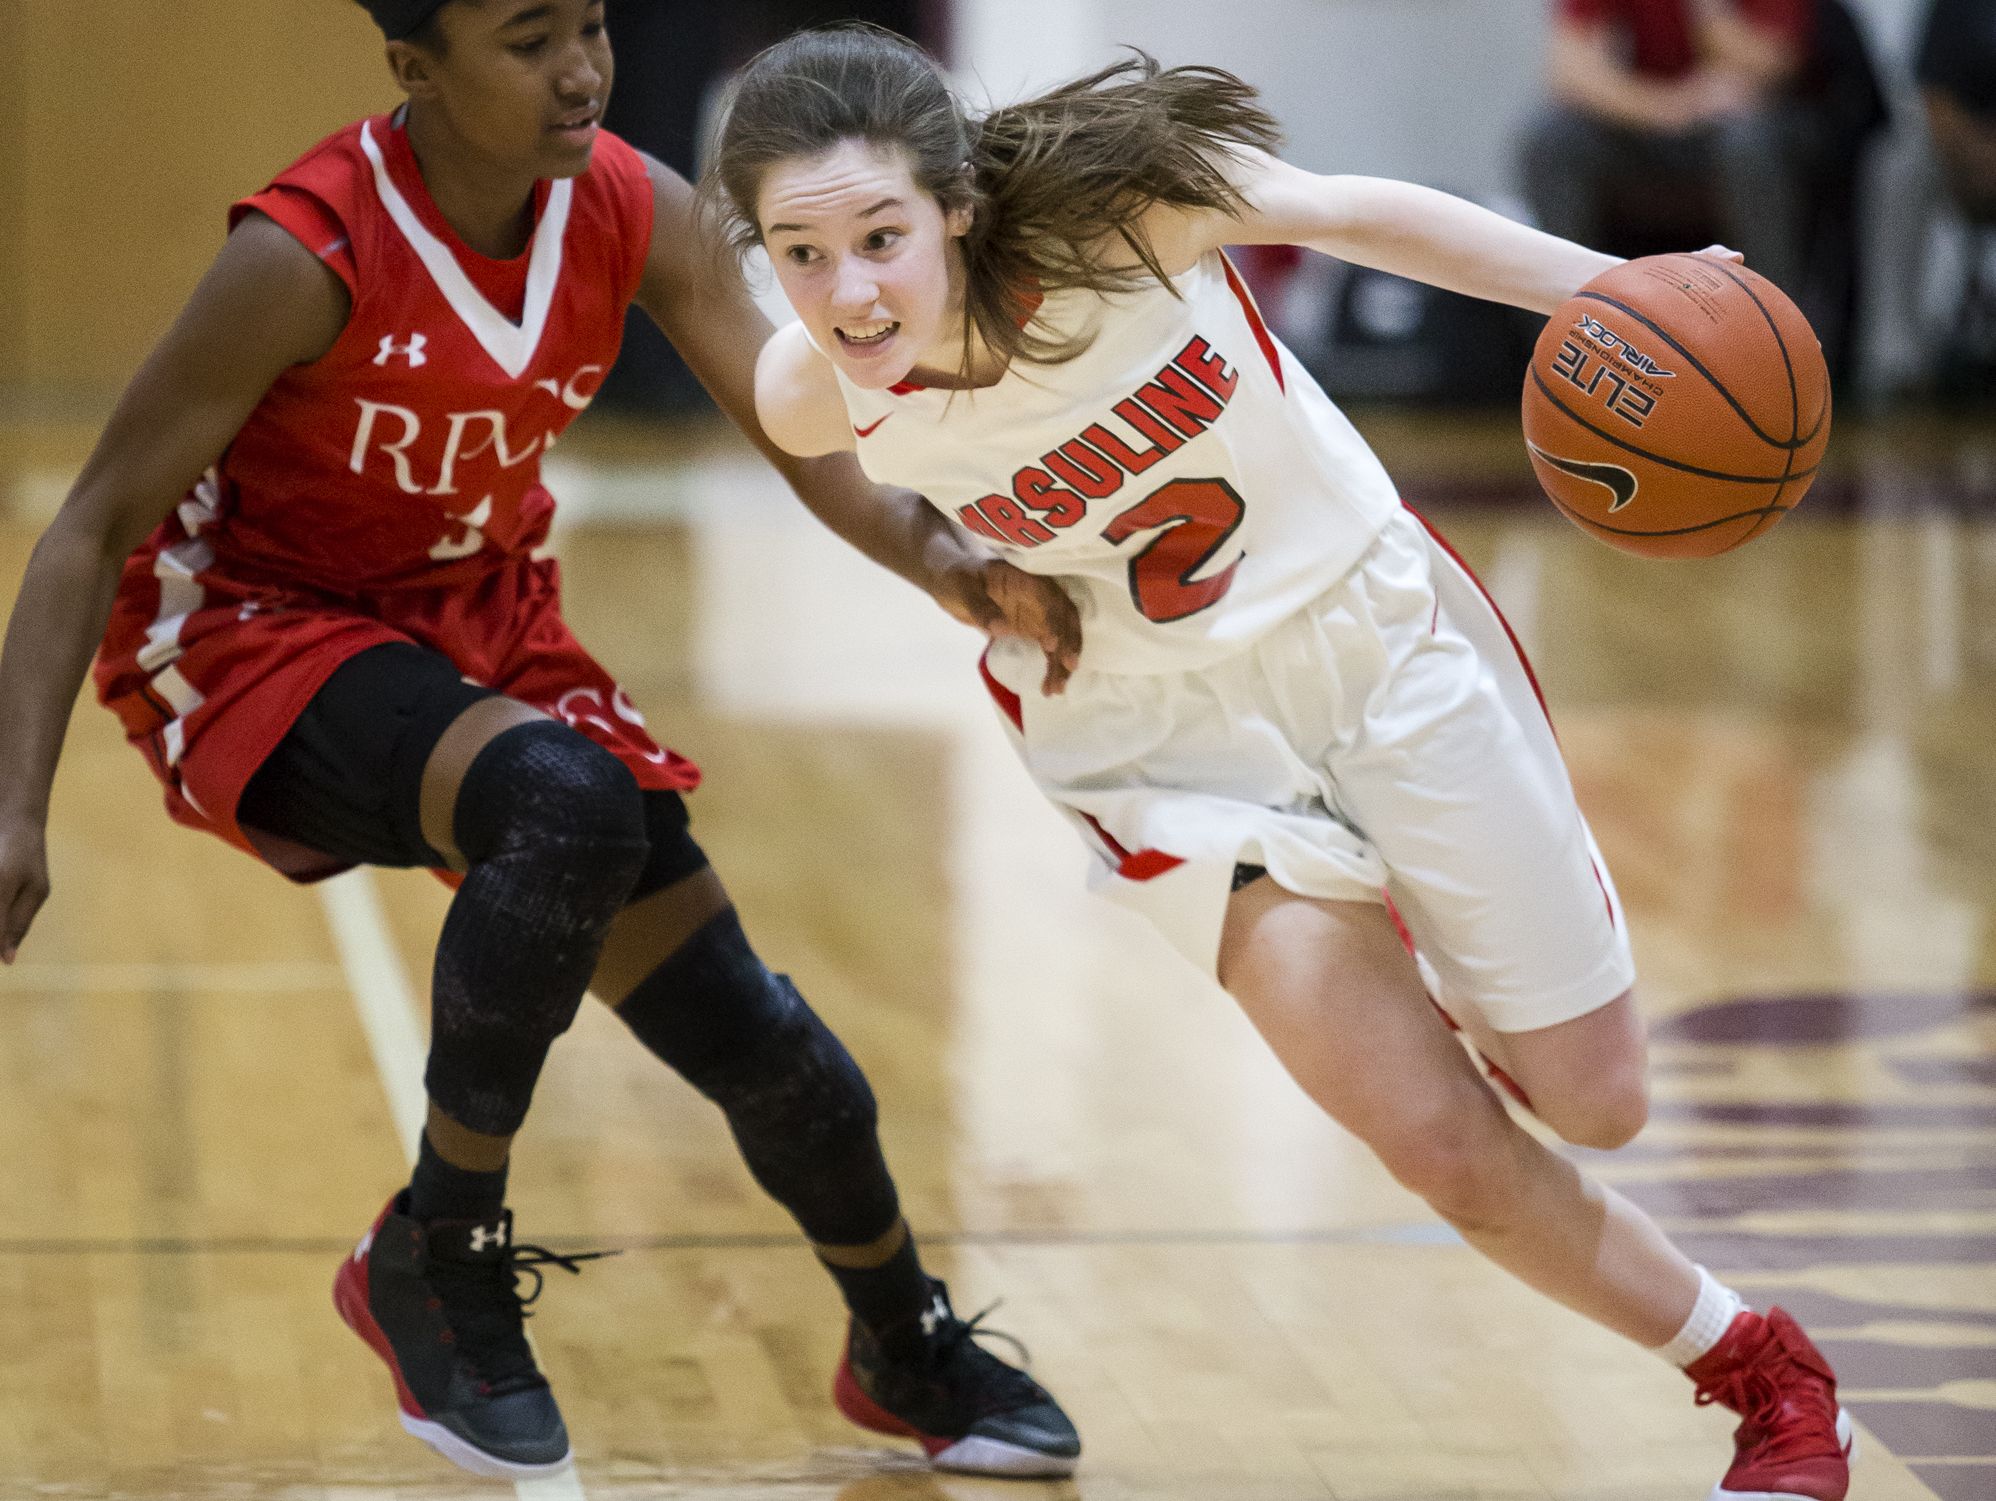 Ursuline's Maggie Connolly drives to the basket in the second half of Ursuline Academy's 47-40 win over Roland Park Country School in the Diamond State Classic at St. Elizabeth High School in Wilmington on Friday evening.